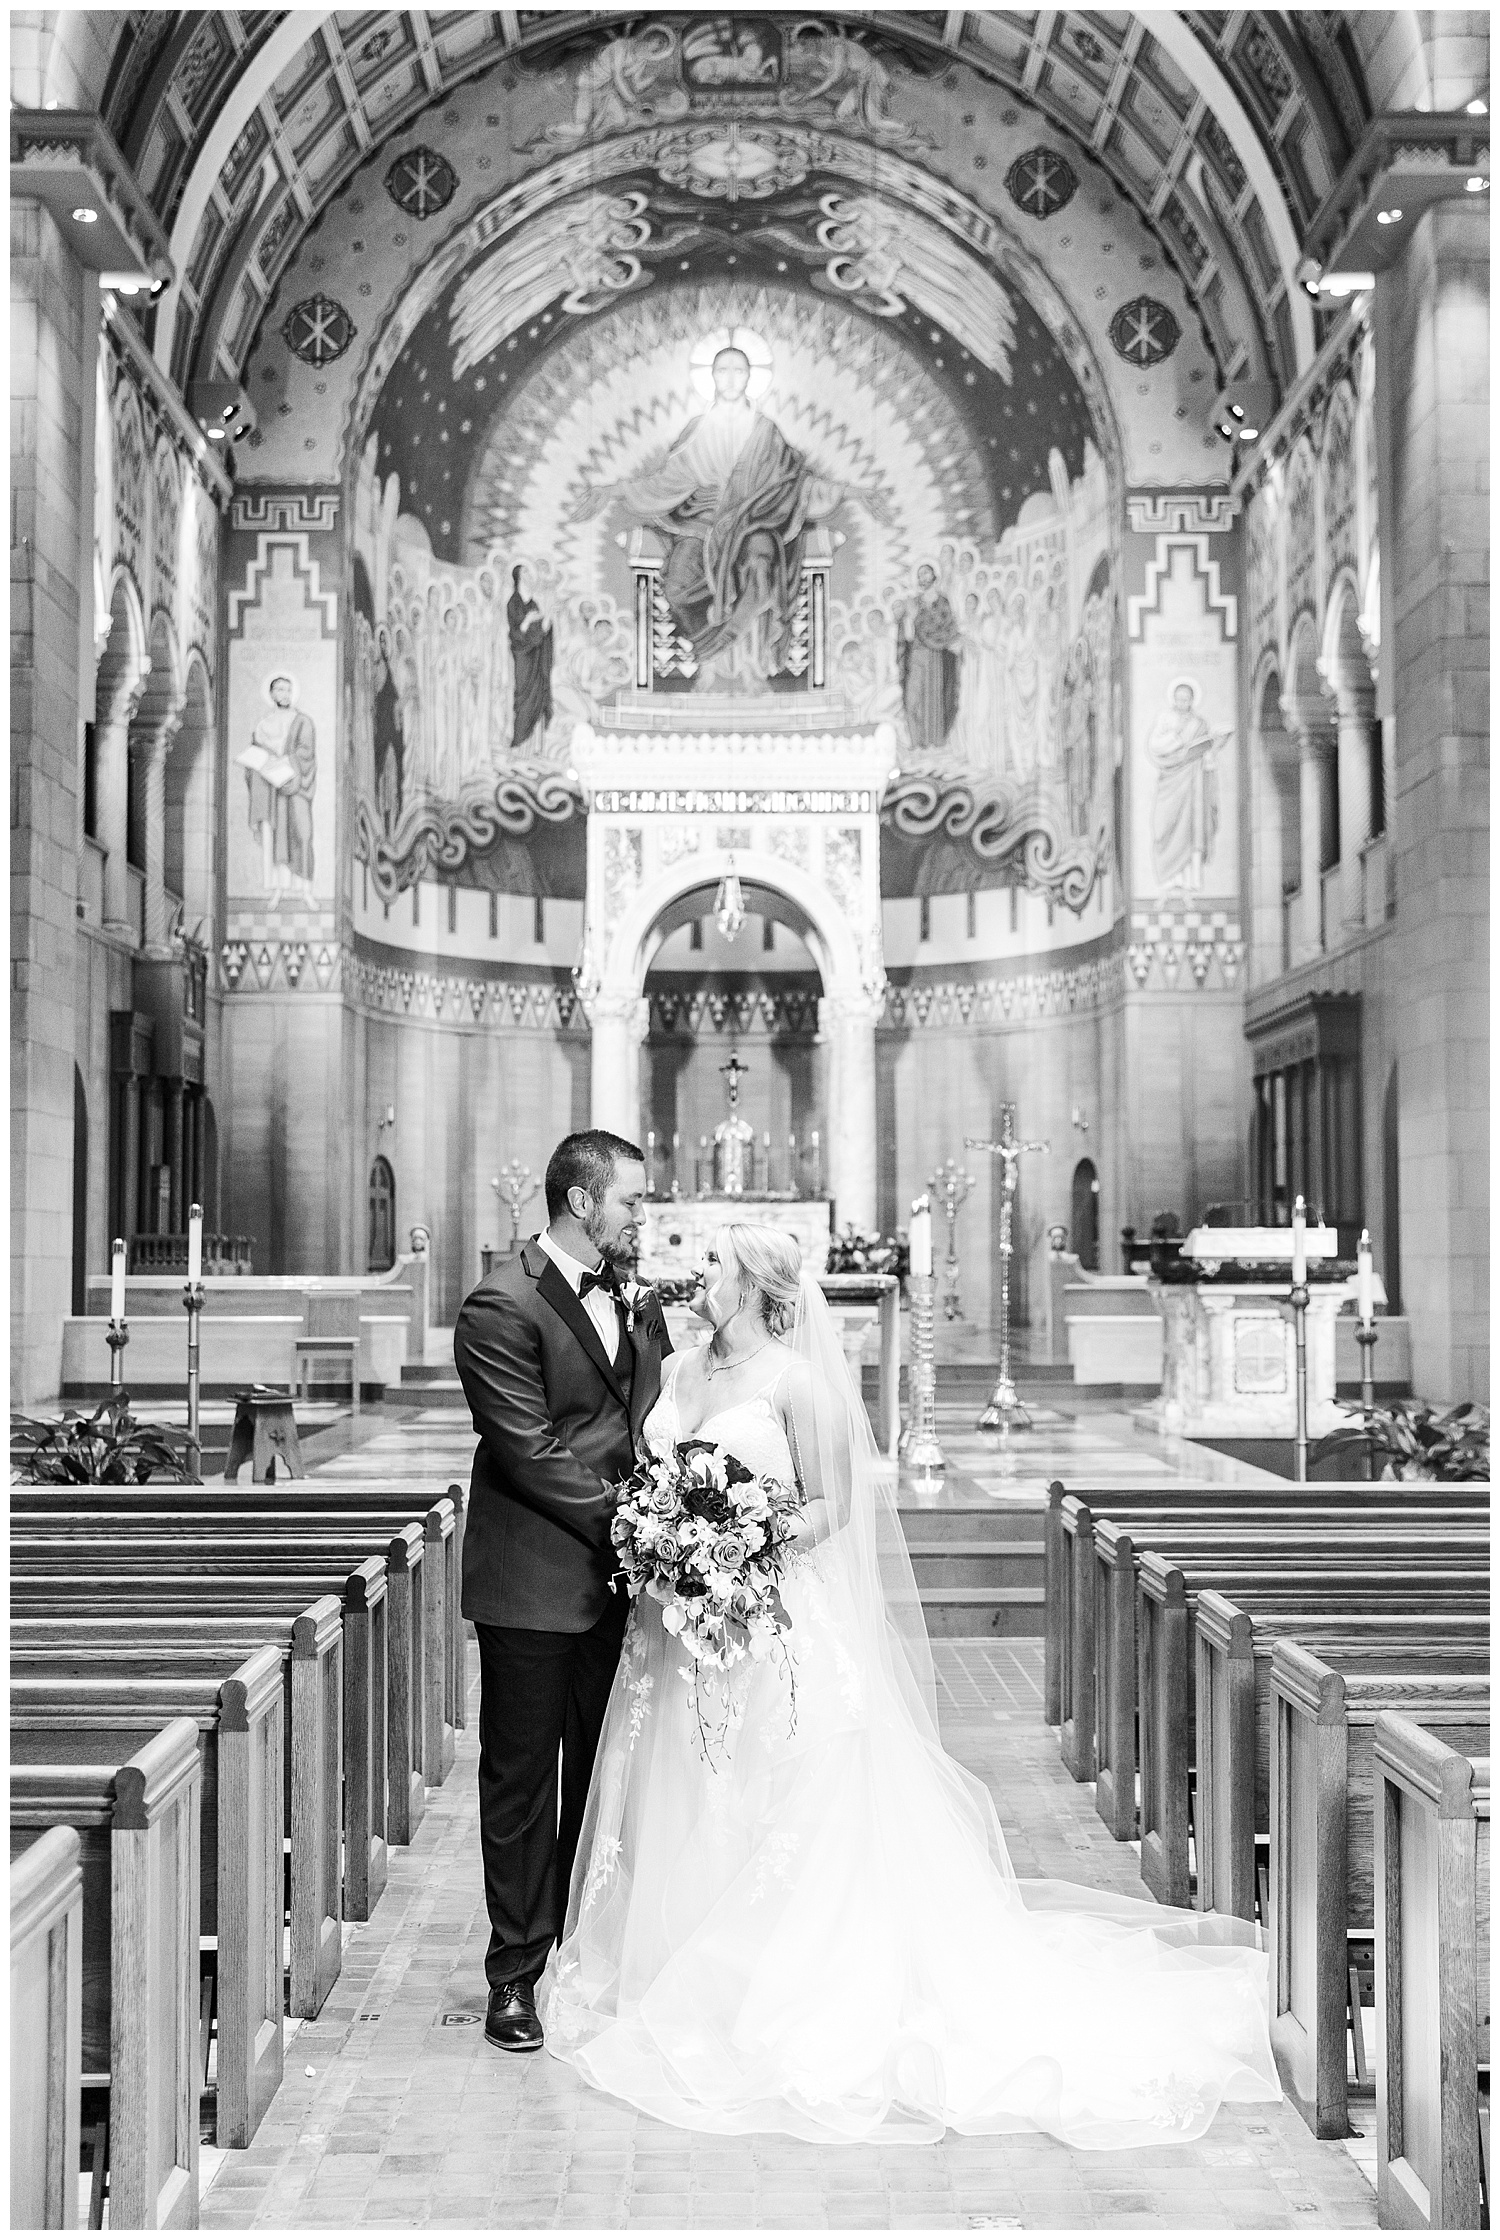 Black and white wedding portrait of couple in church